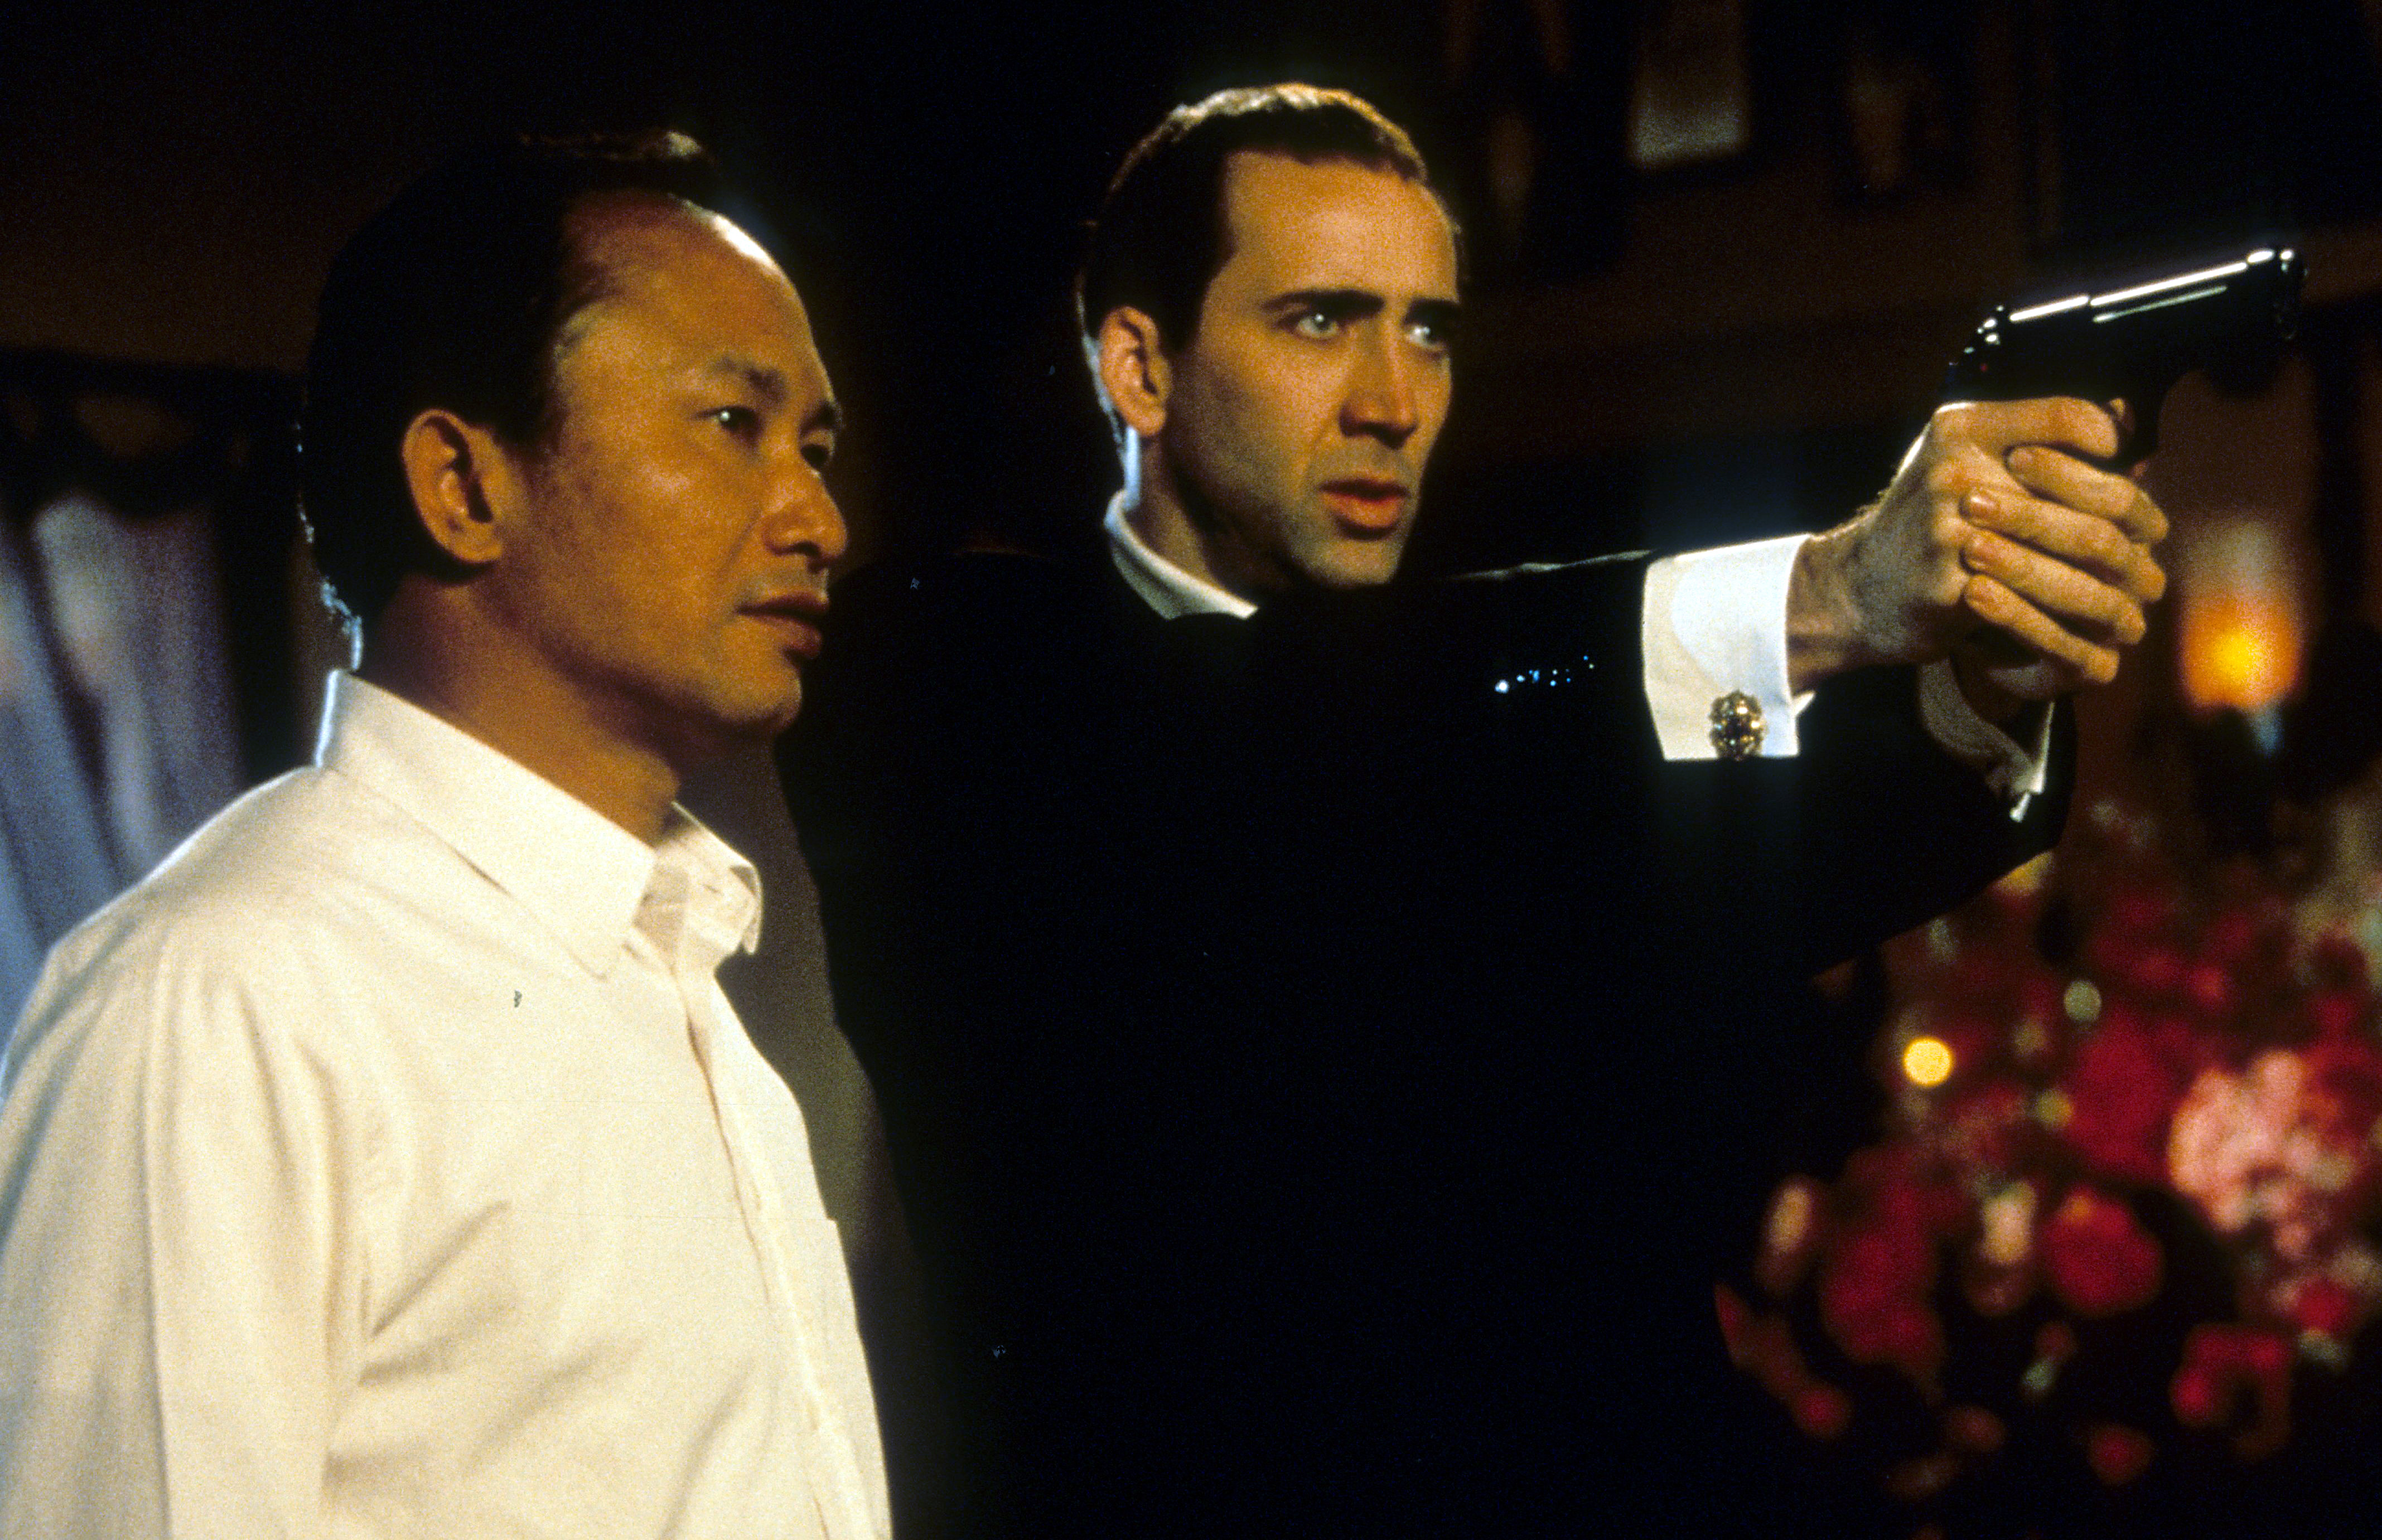 Nicolas Cage and John Woo behind the scenes of Face/Off